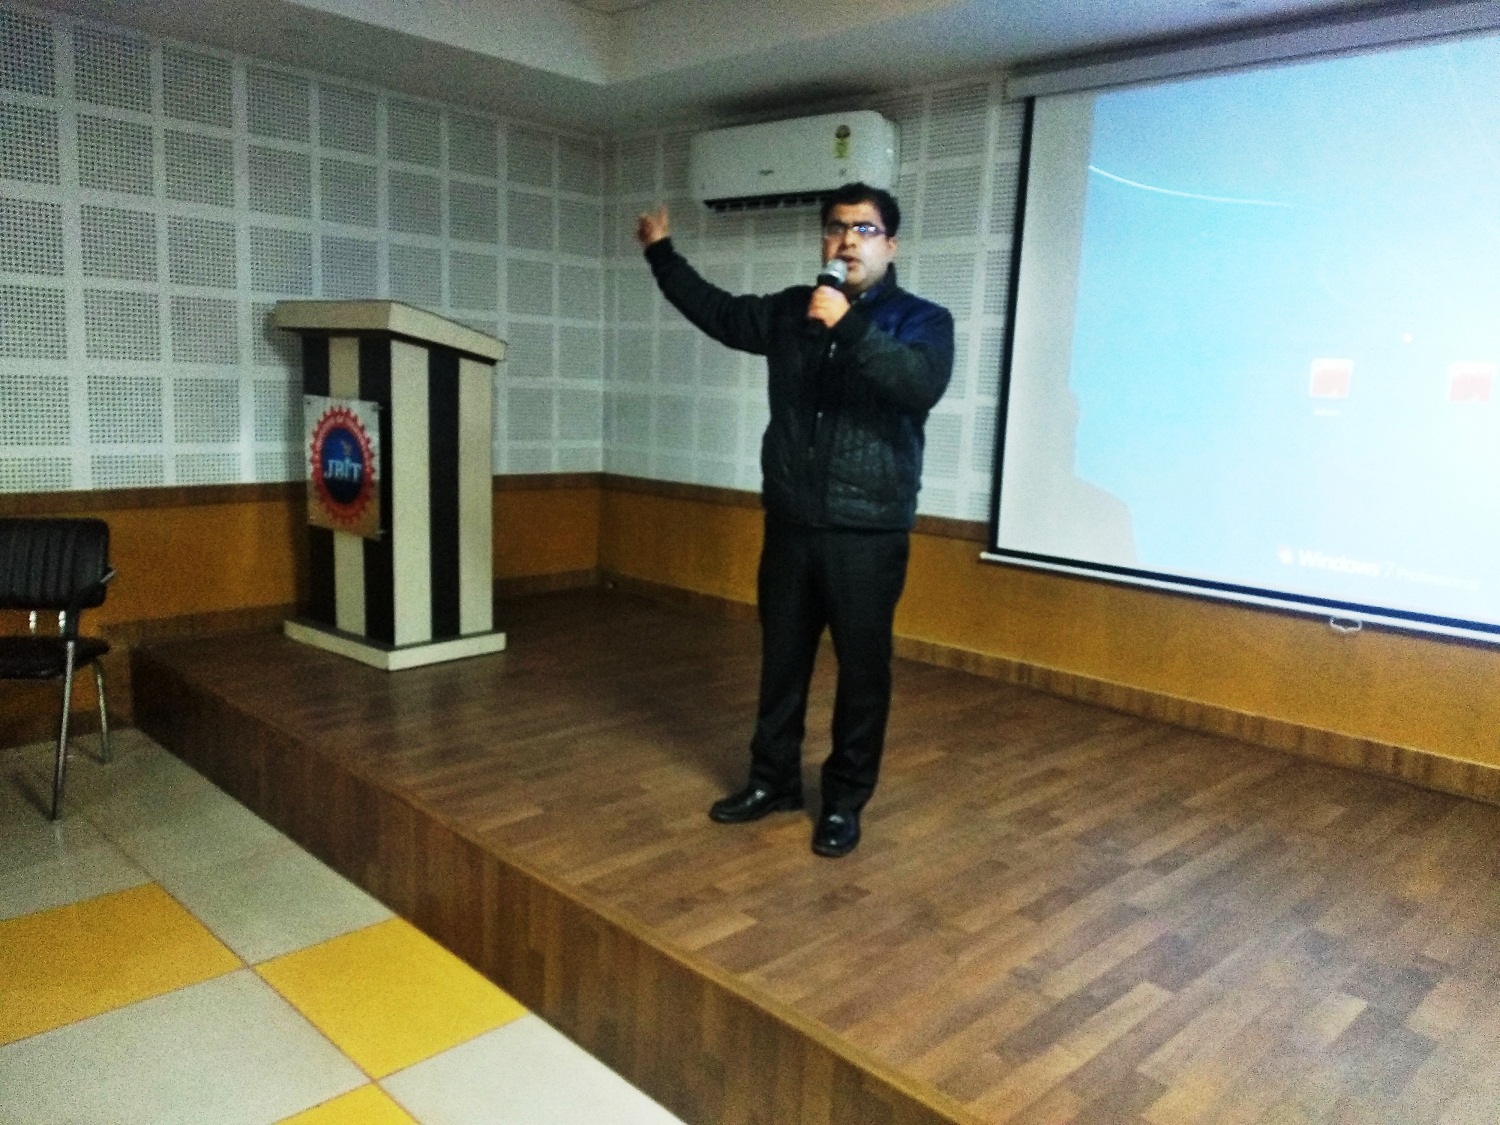 Workshop on “Personality Assessment”